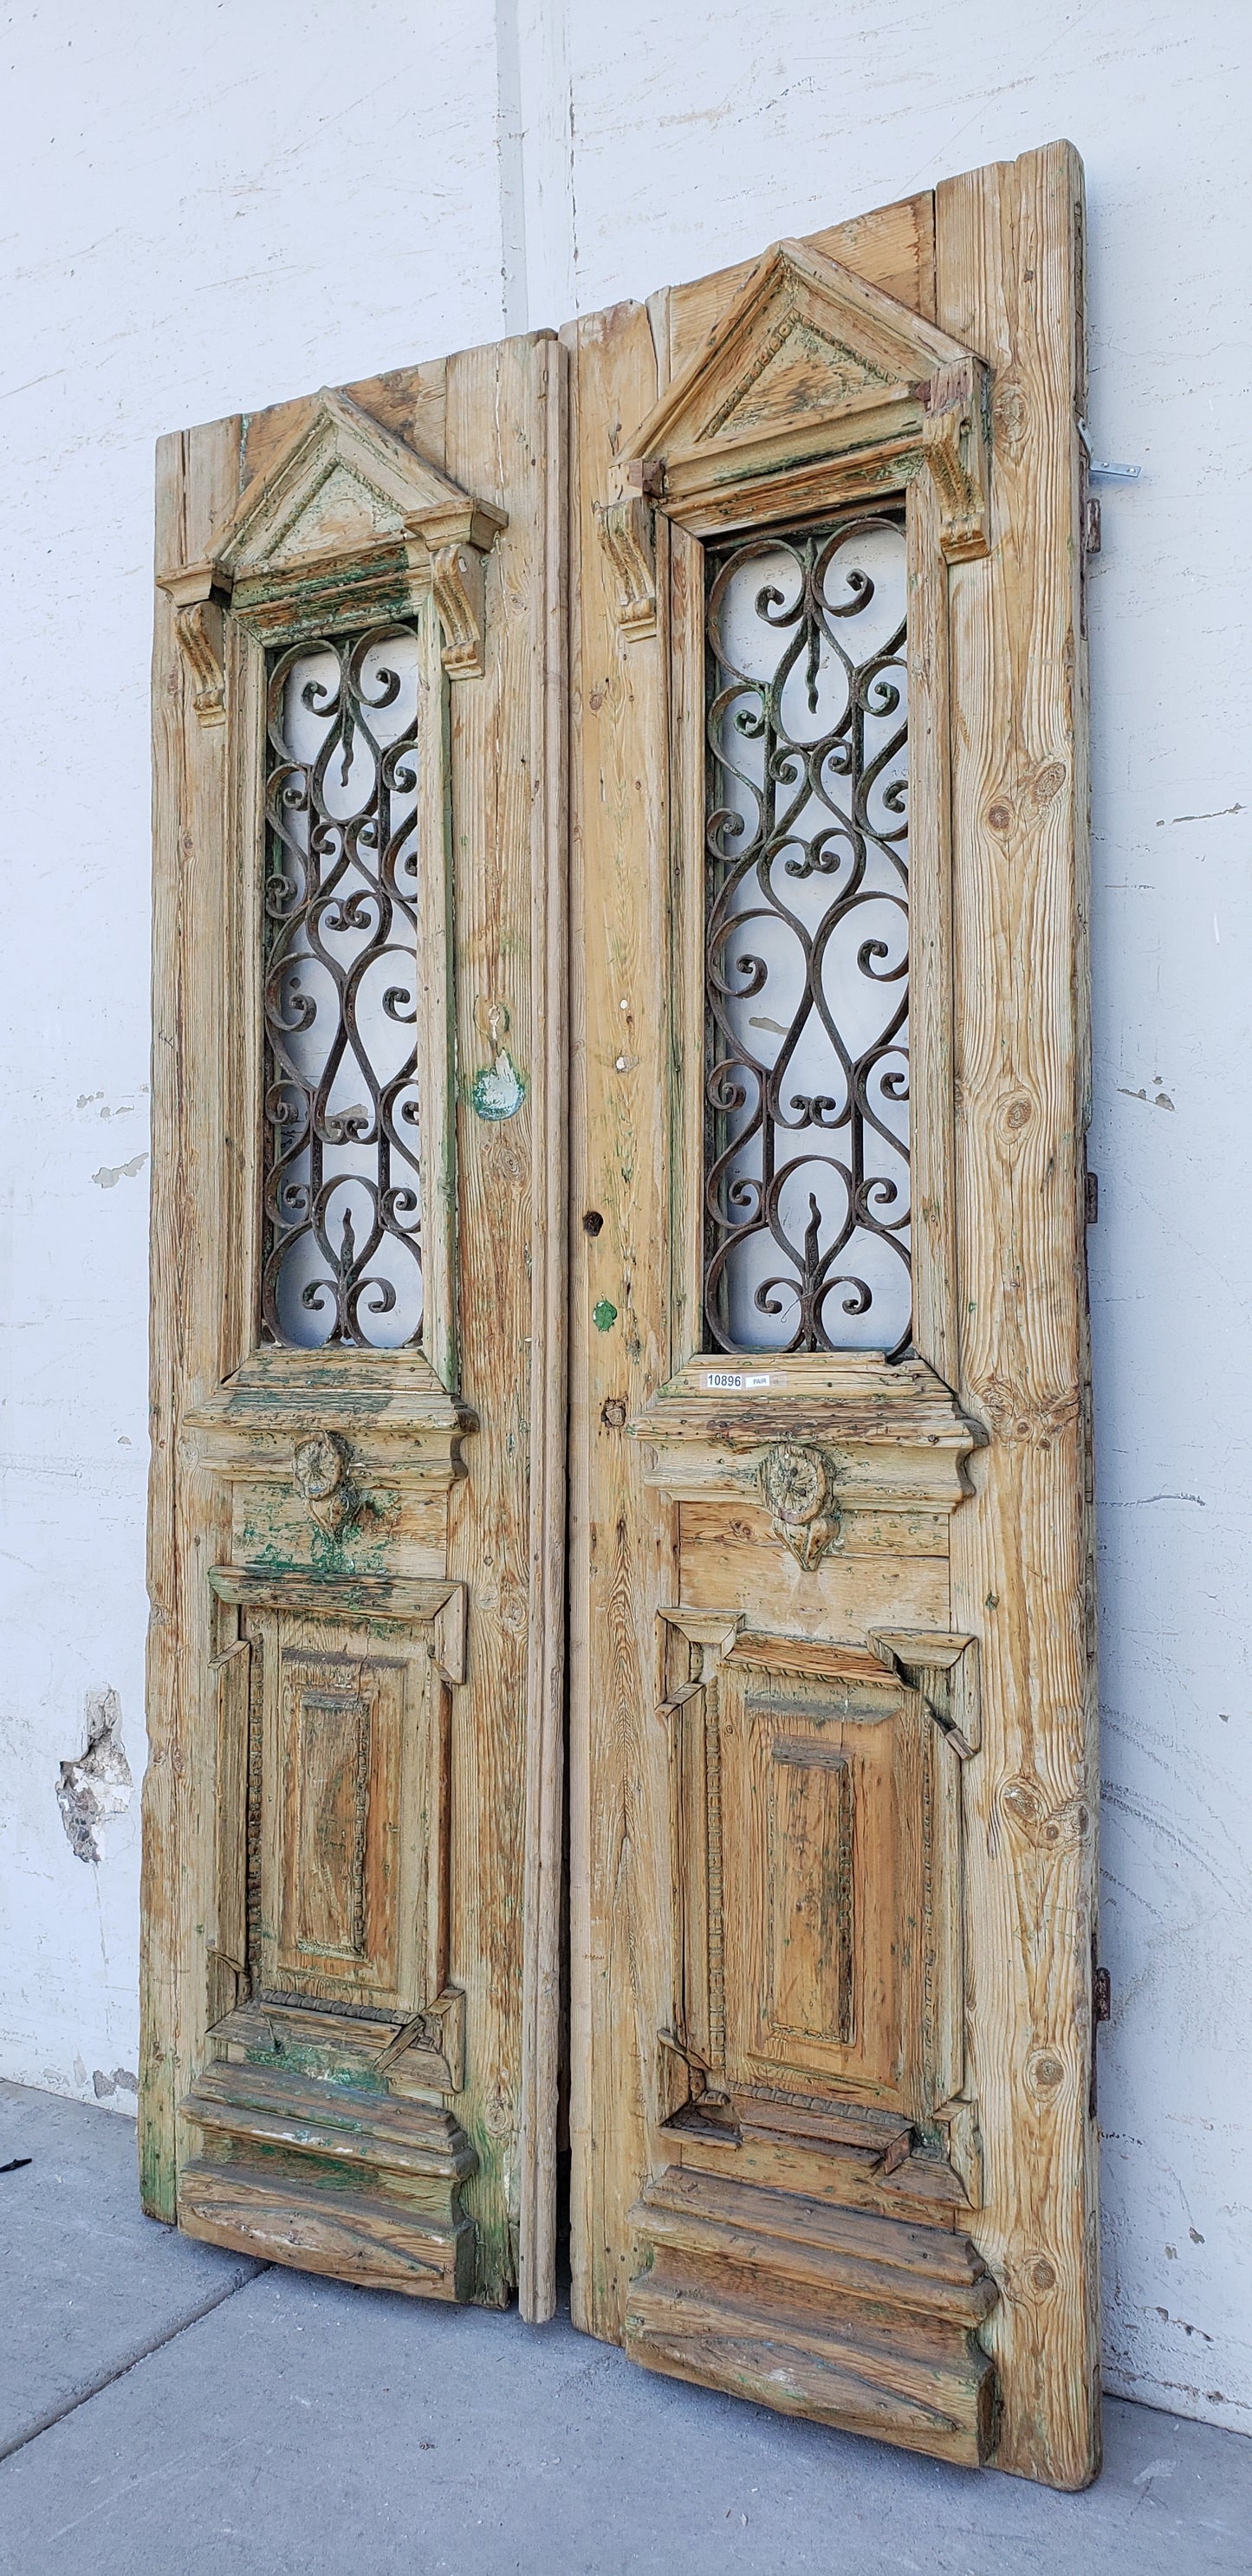 Pair of Ornate Wood Antique Carved Doors with Iron Inserts, c.1880 France (no glass)